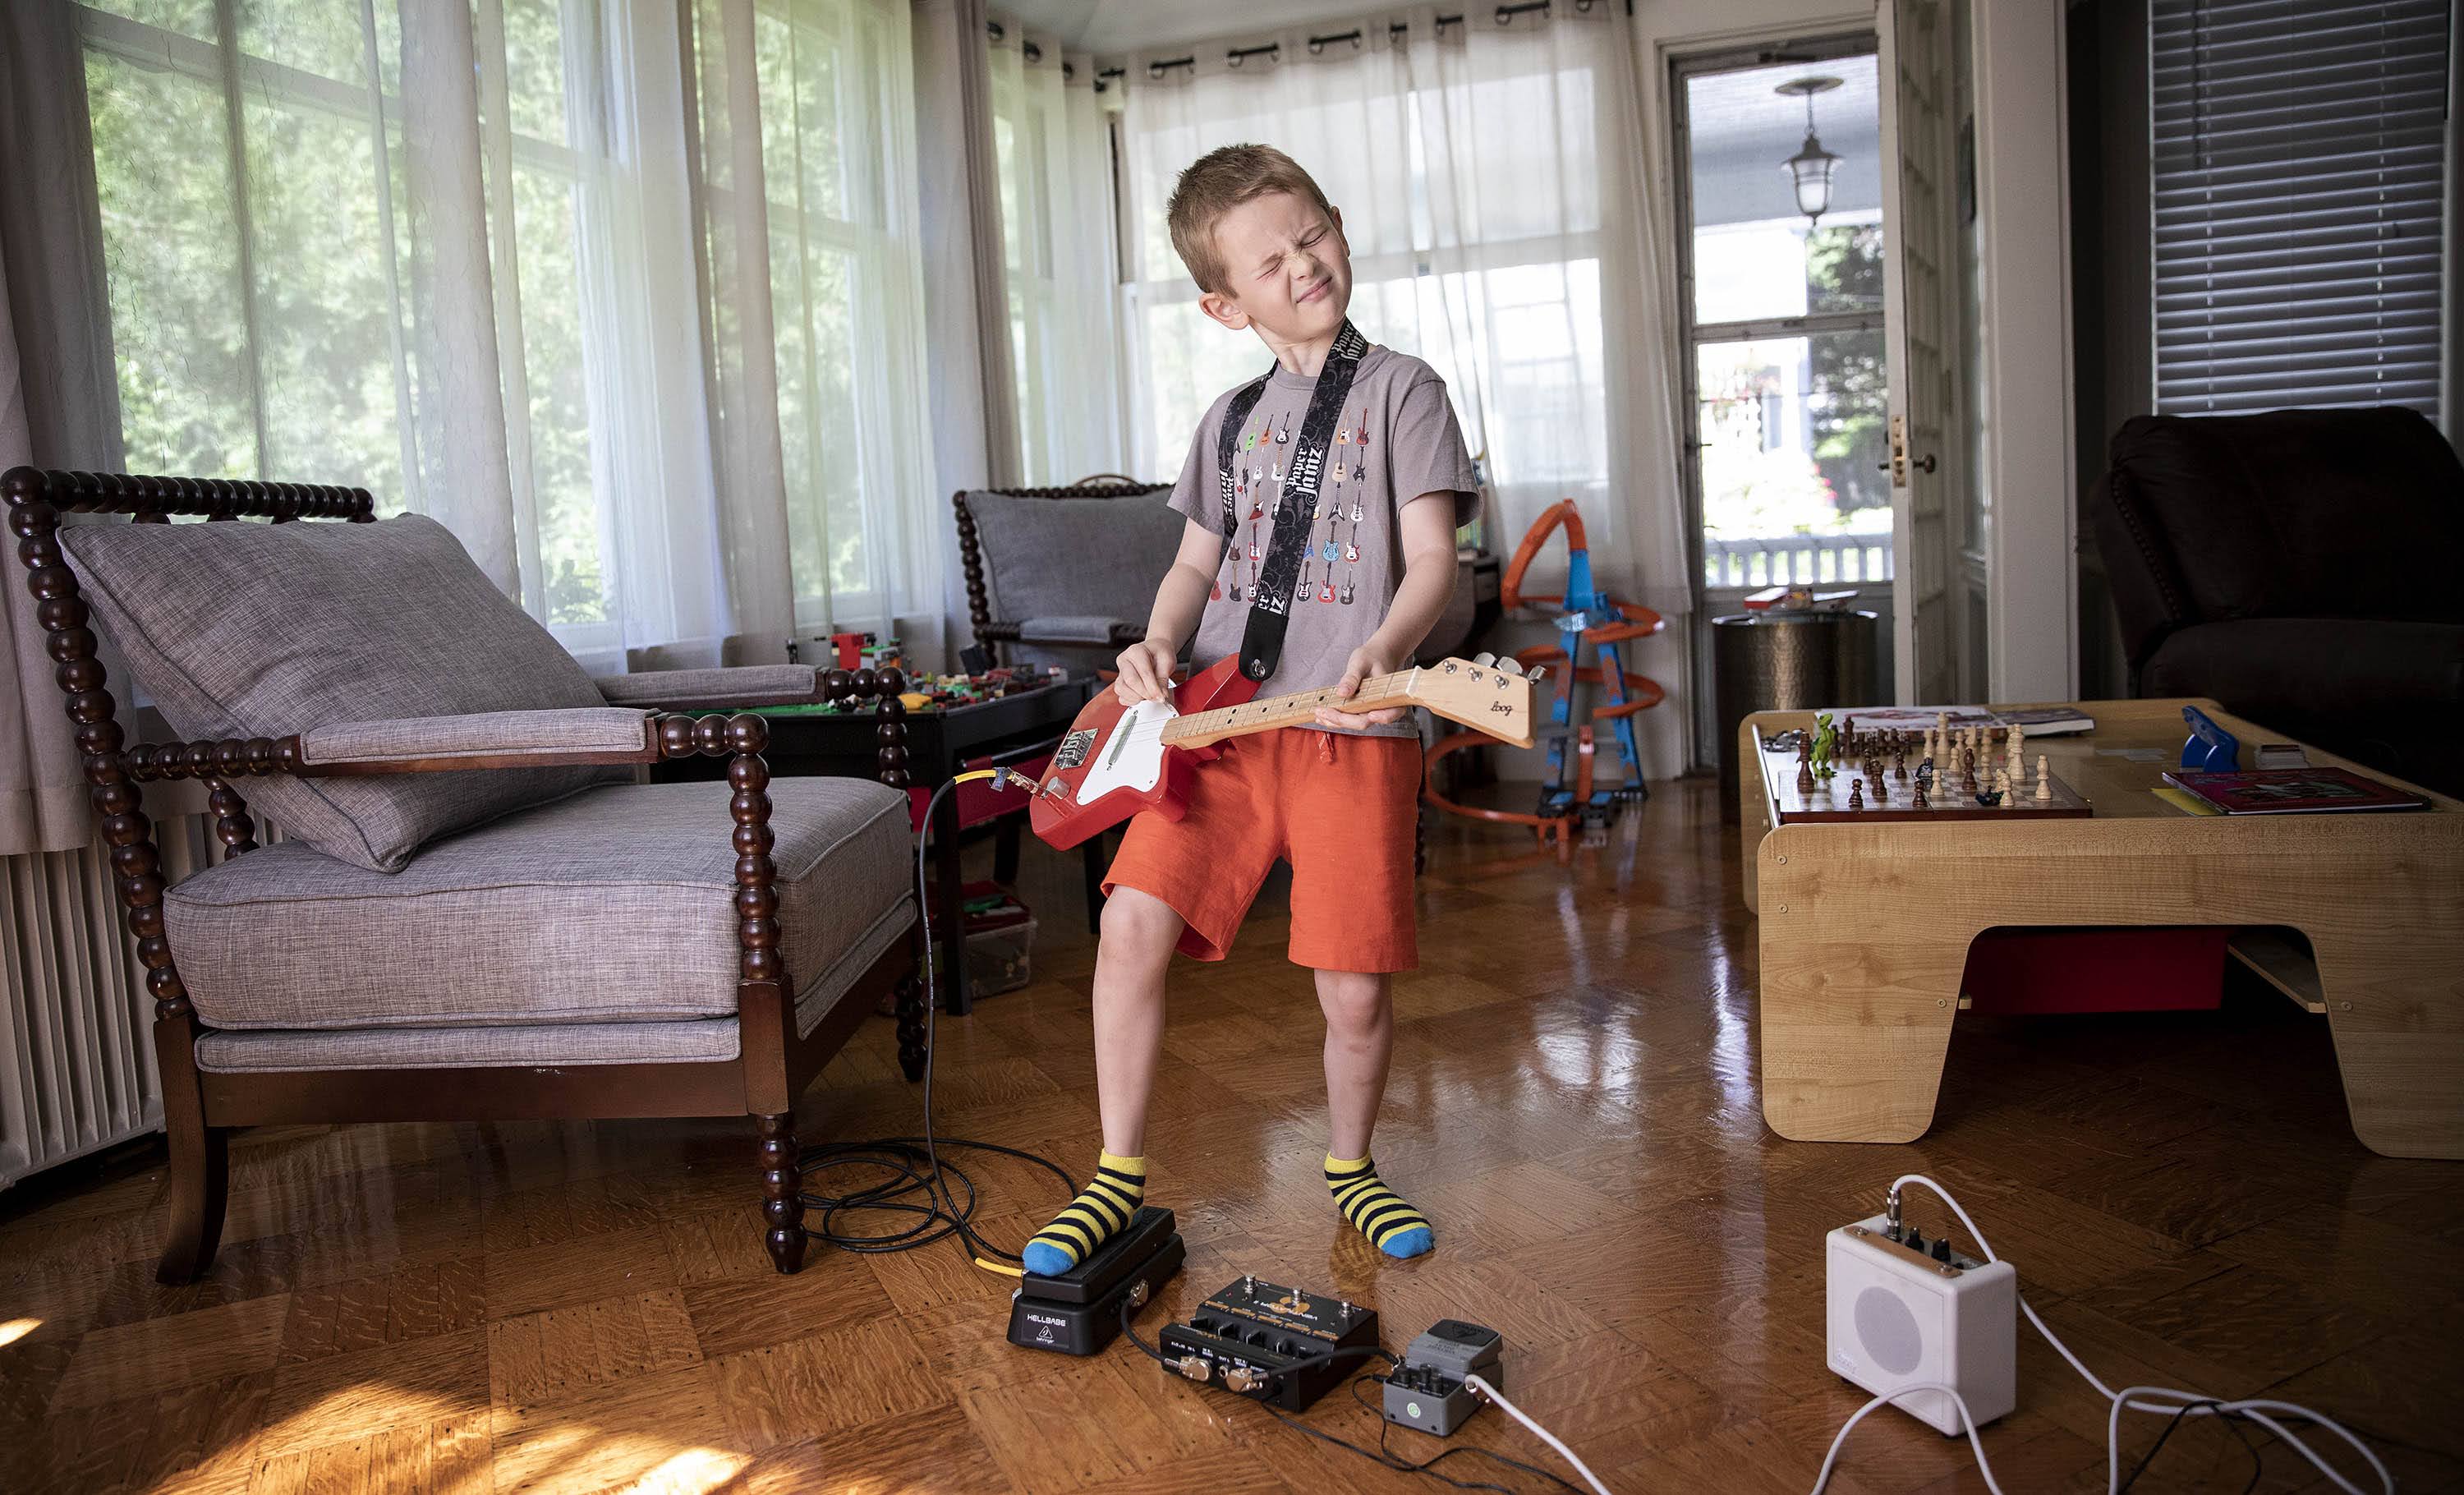 Arlen gets in some practice on his electric guitar. The young musician is the inspiration for &quot;The Boy Who Wanted to Rock,&quot; written by his father Dave Weiser. (Robin Lubbock/WBUR)